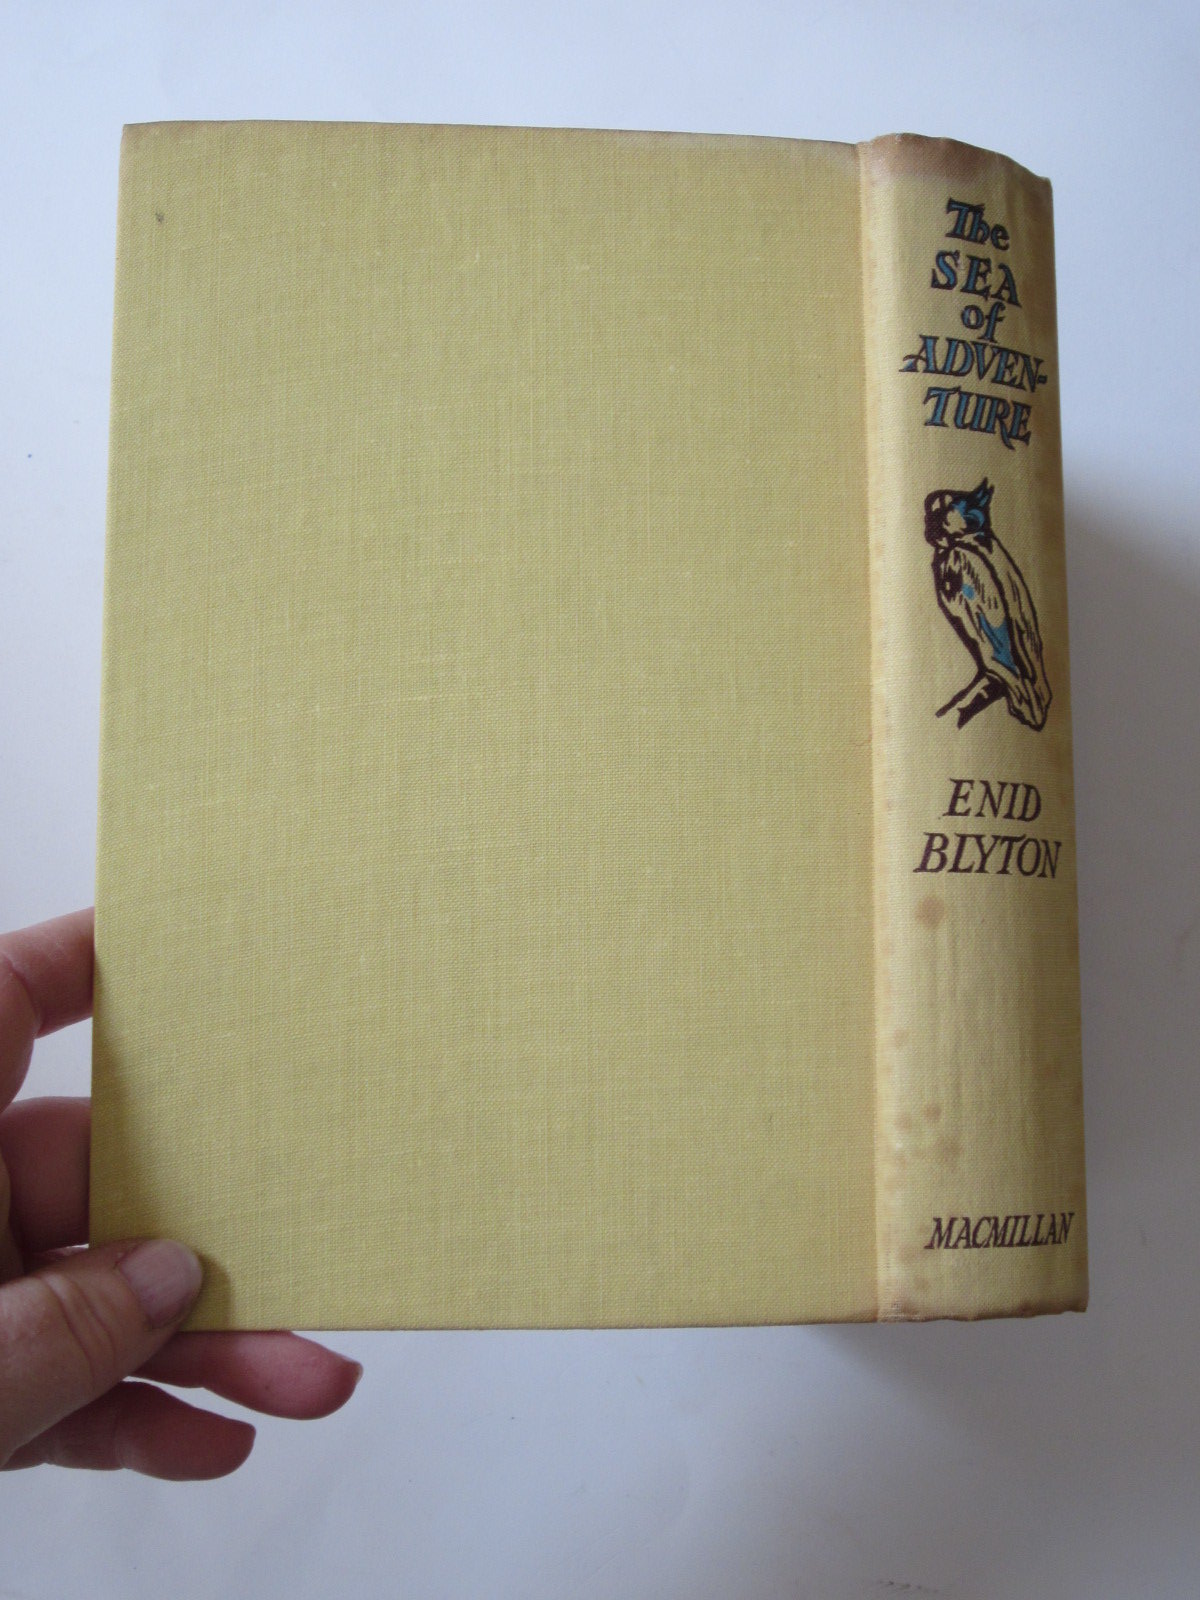 Photo of THE SEA OF ADVENTURE written by Blyton, Enid illustrated by Tresilian, Stuart published by Macmillan & Co. Ltd. (STOCK CODE: 1308166)  for sale by Stella & Rose's Books